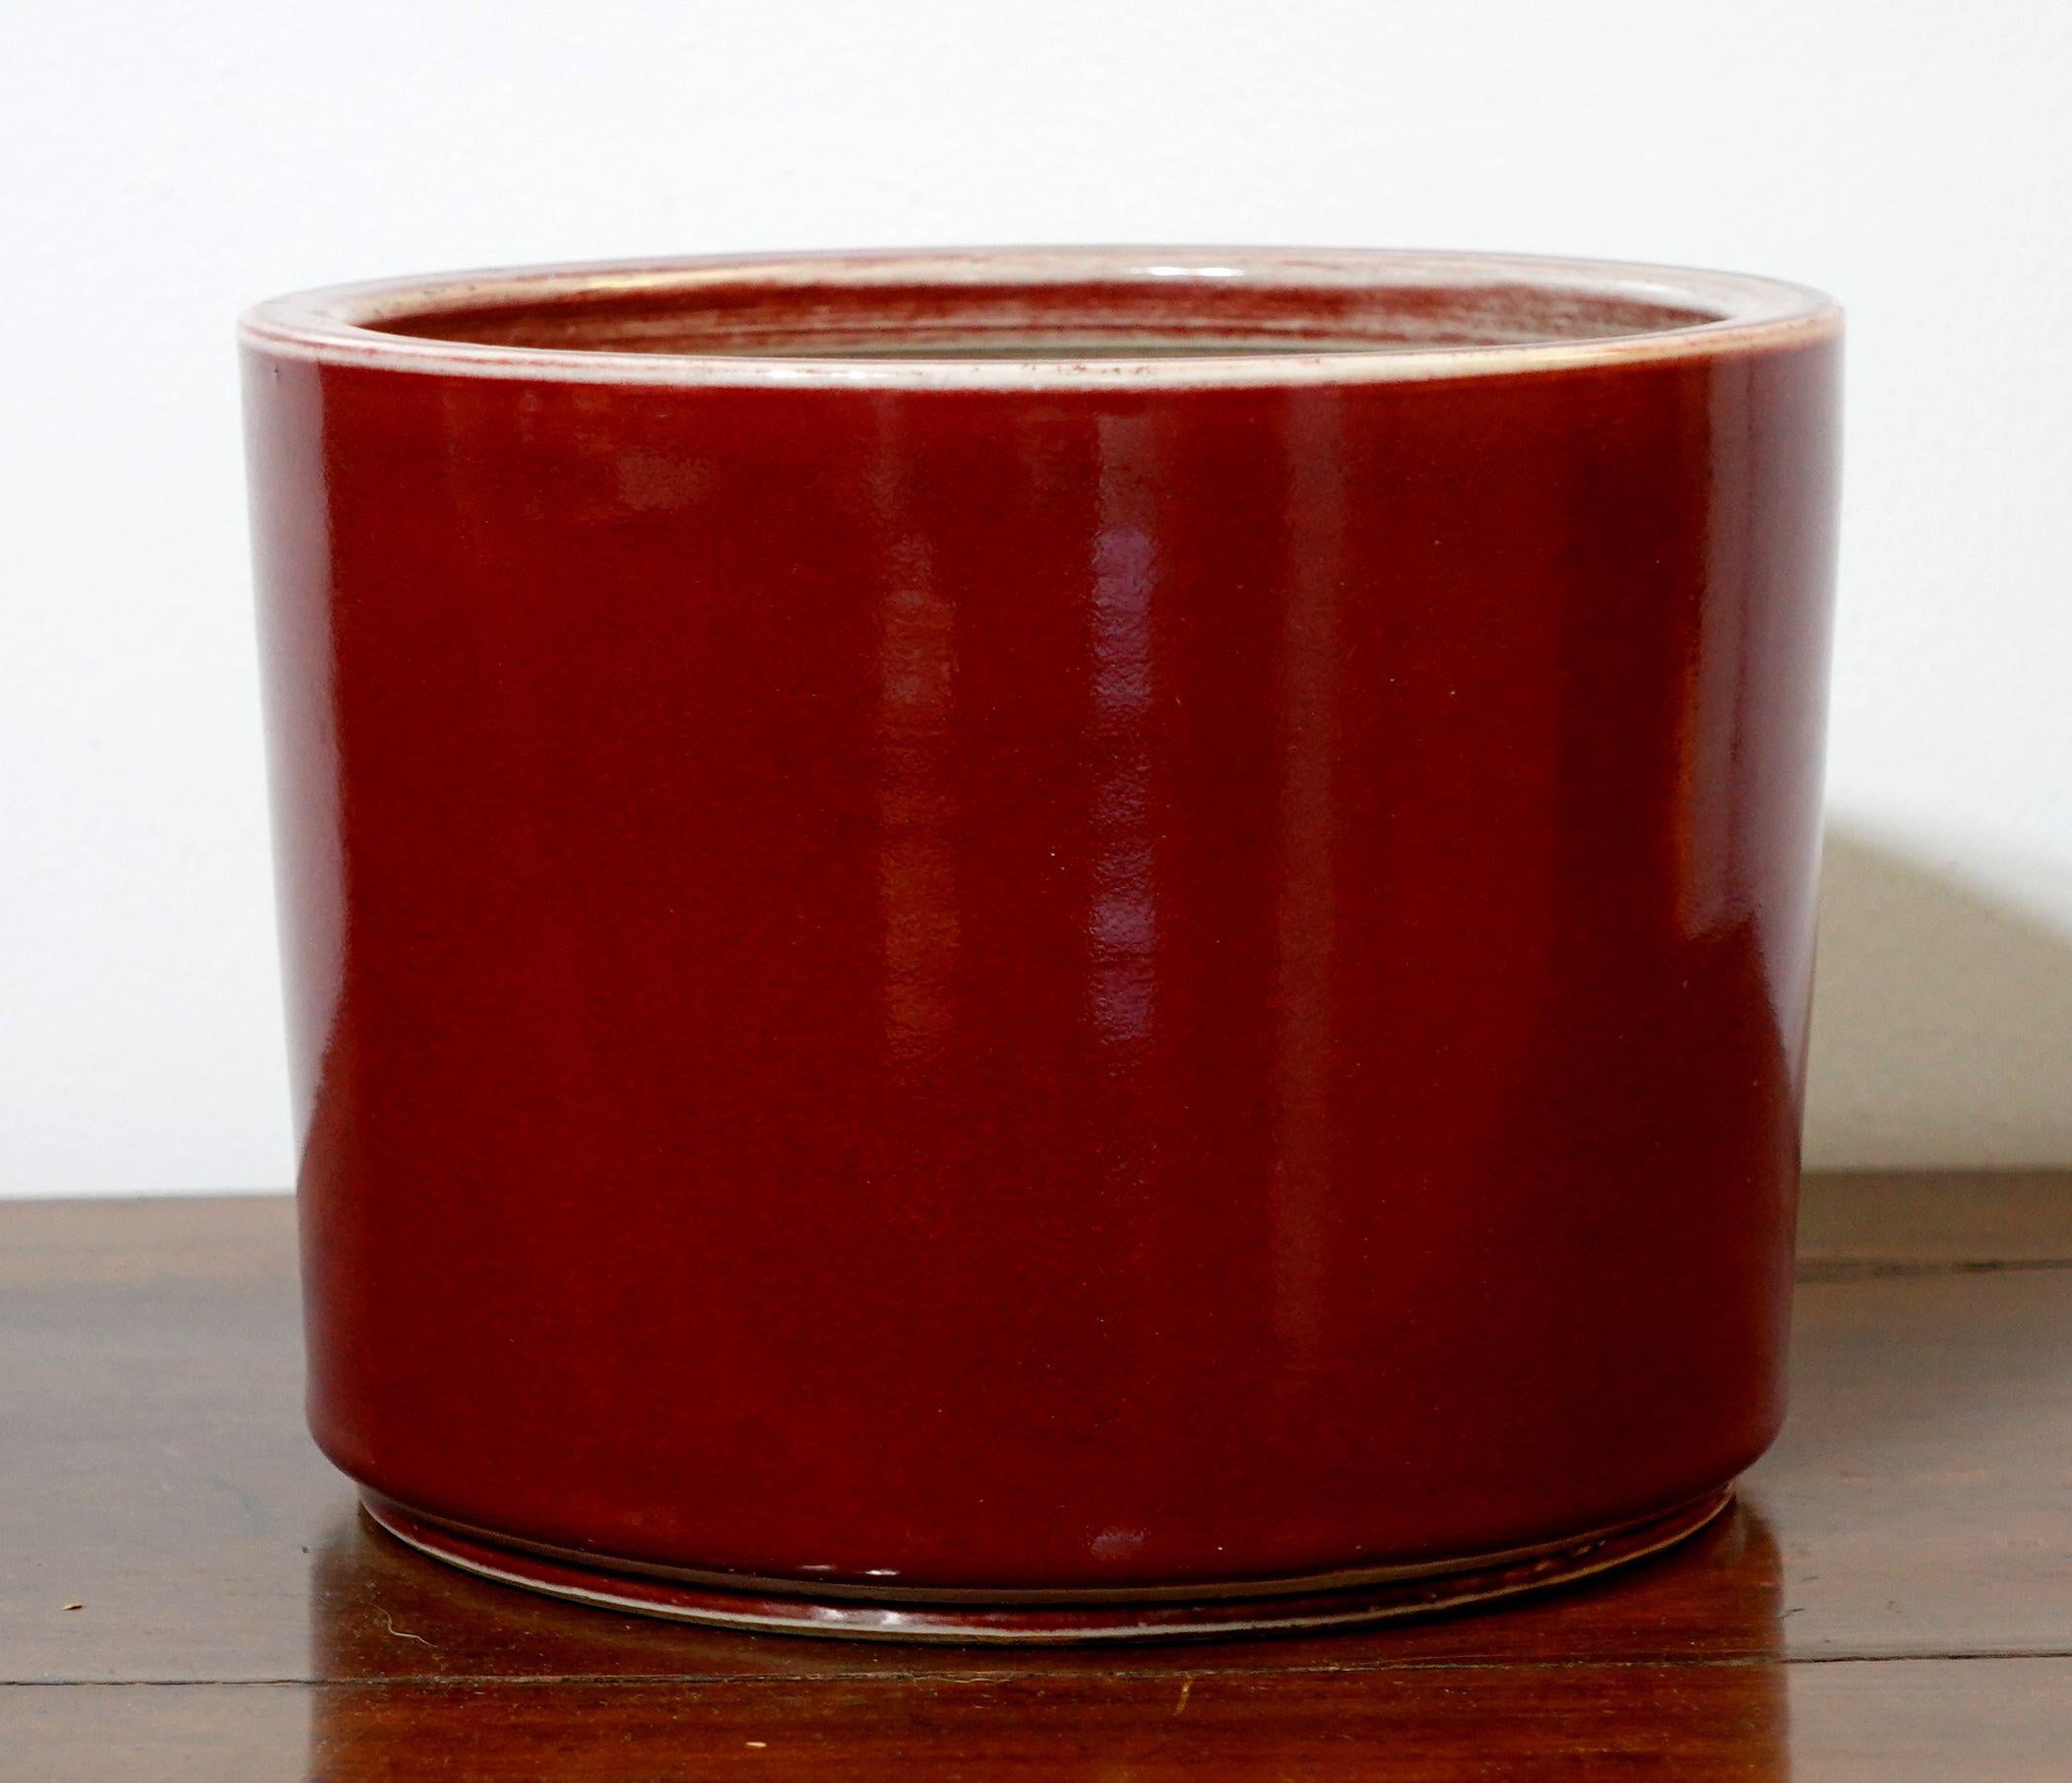 China, Oxblood-Glazed brush holder/pot, 19th Century, cylindrical form rested on a broads bisque foot rim, the bisque base with combed circles.
Measures: H: 6 1/2